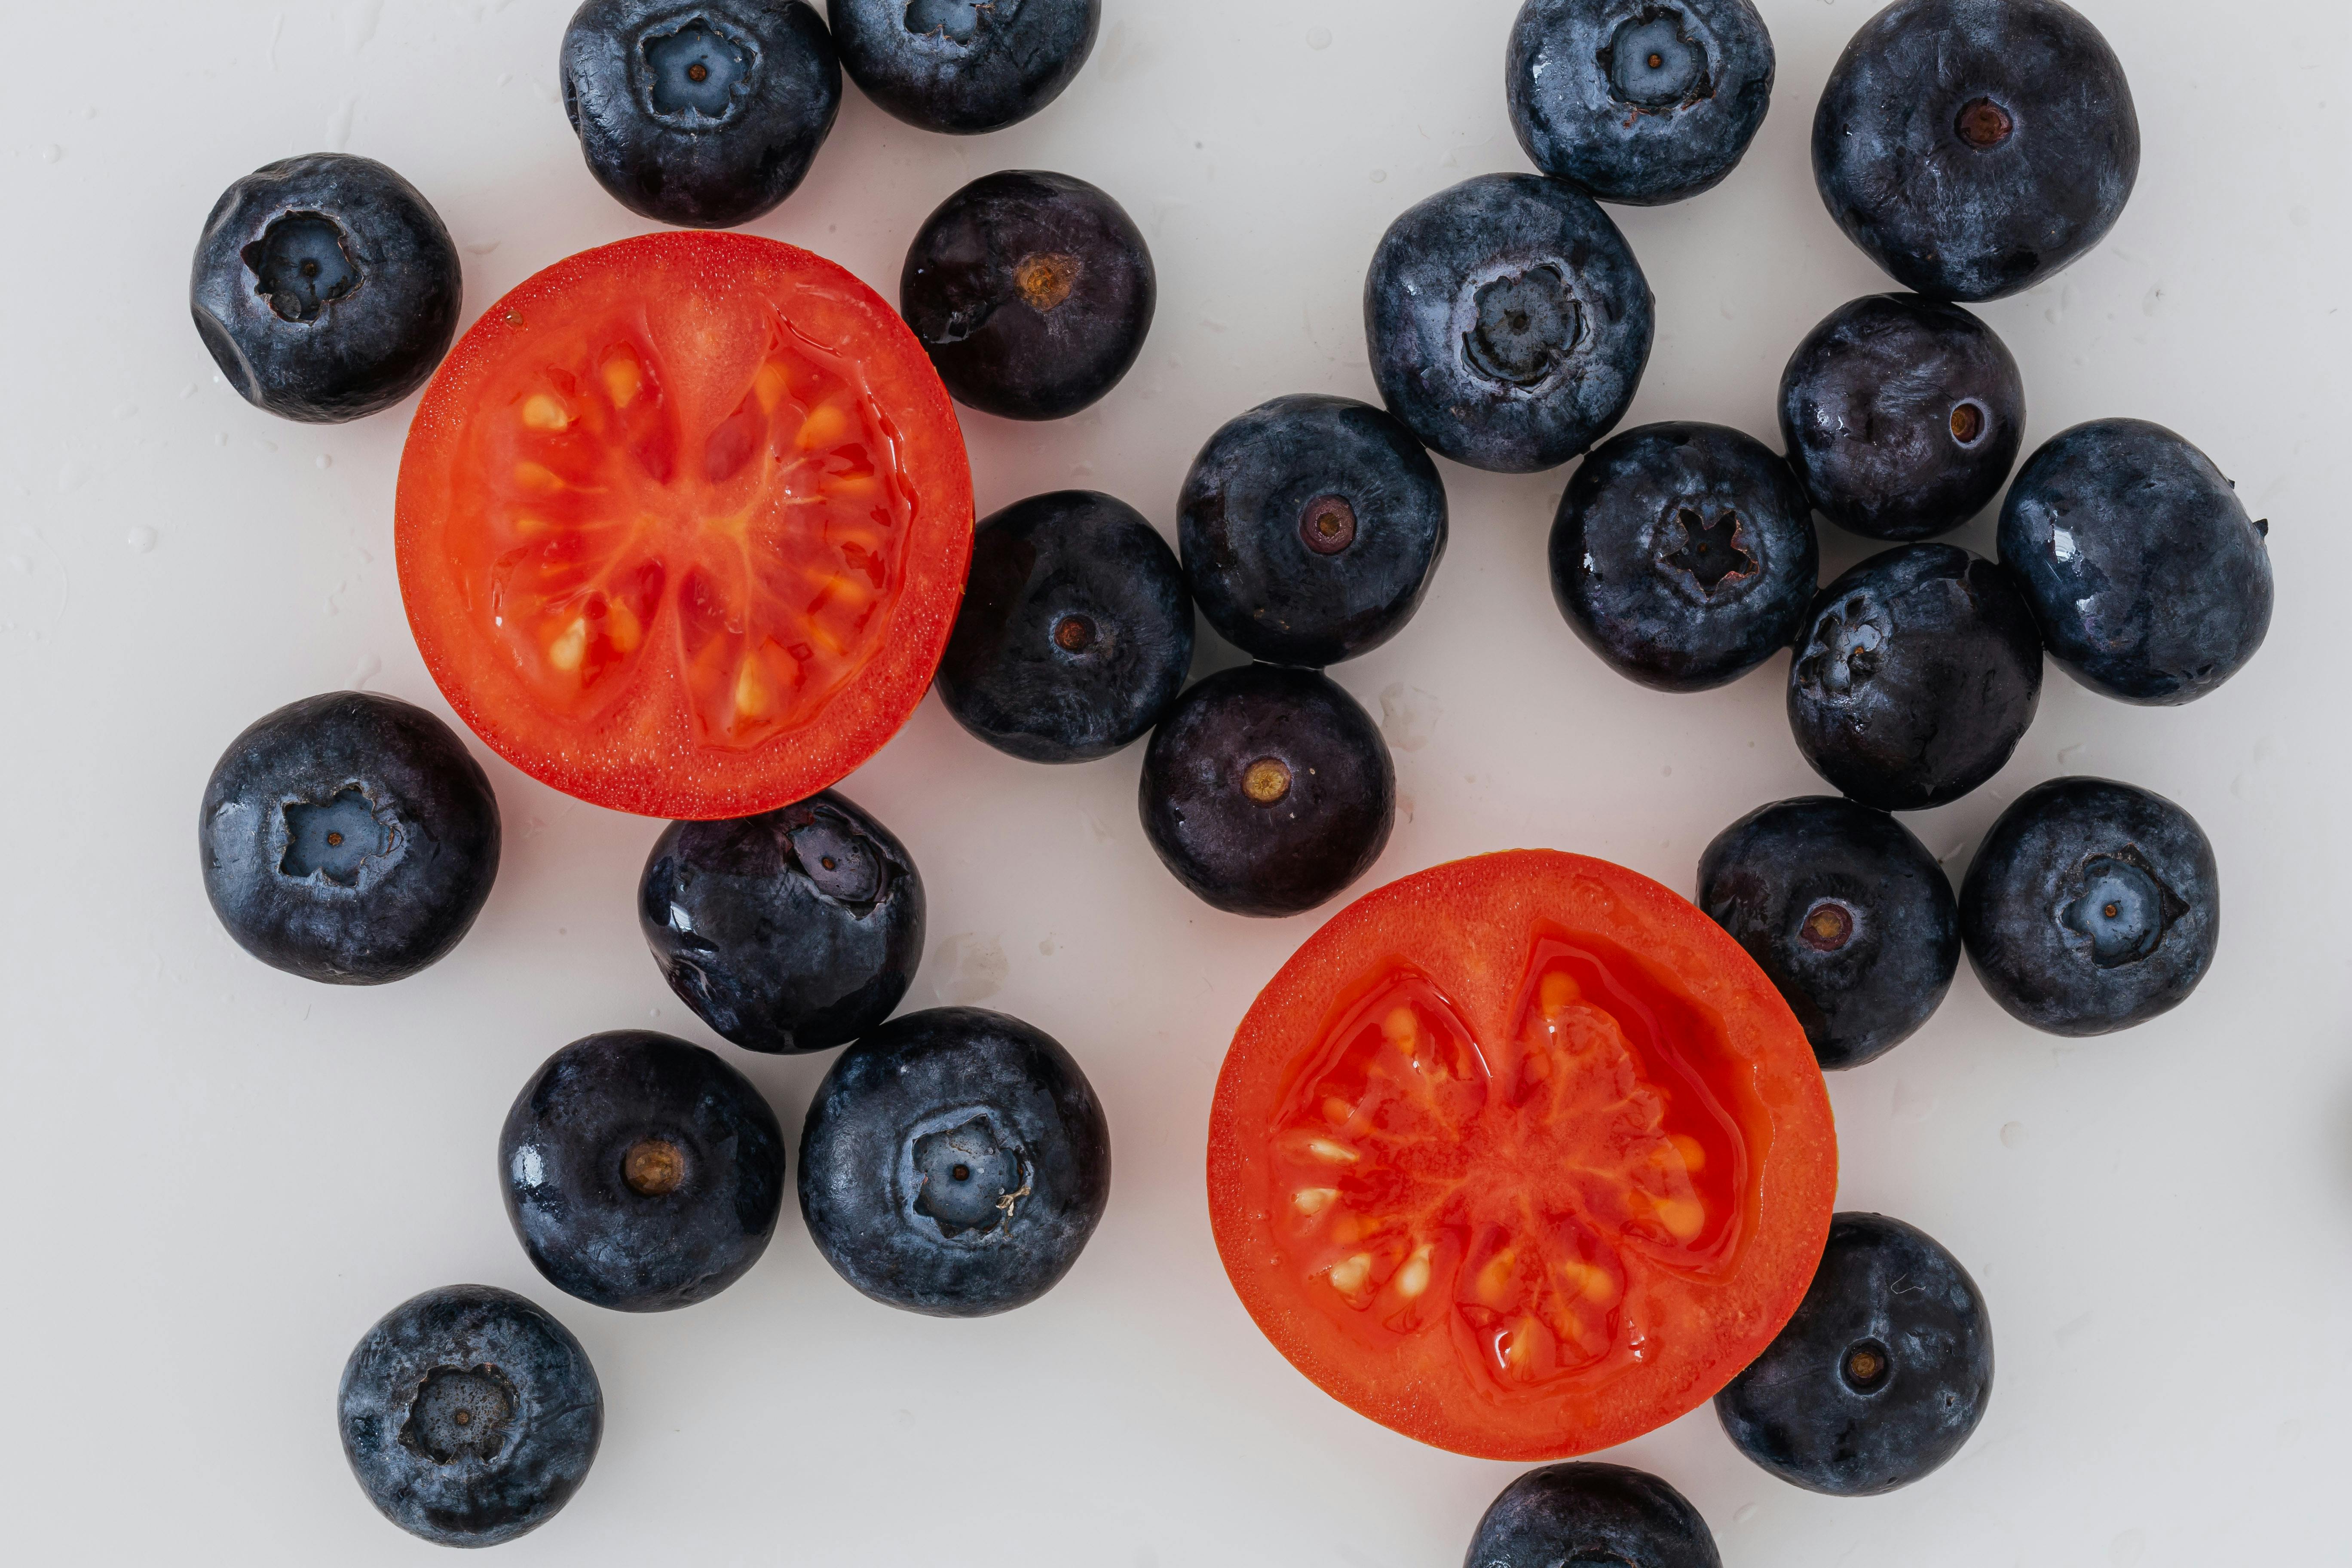 halves of tomato and scattered blueberries